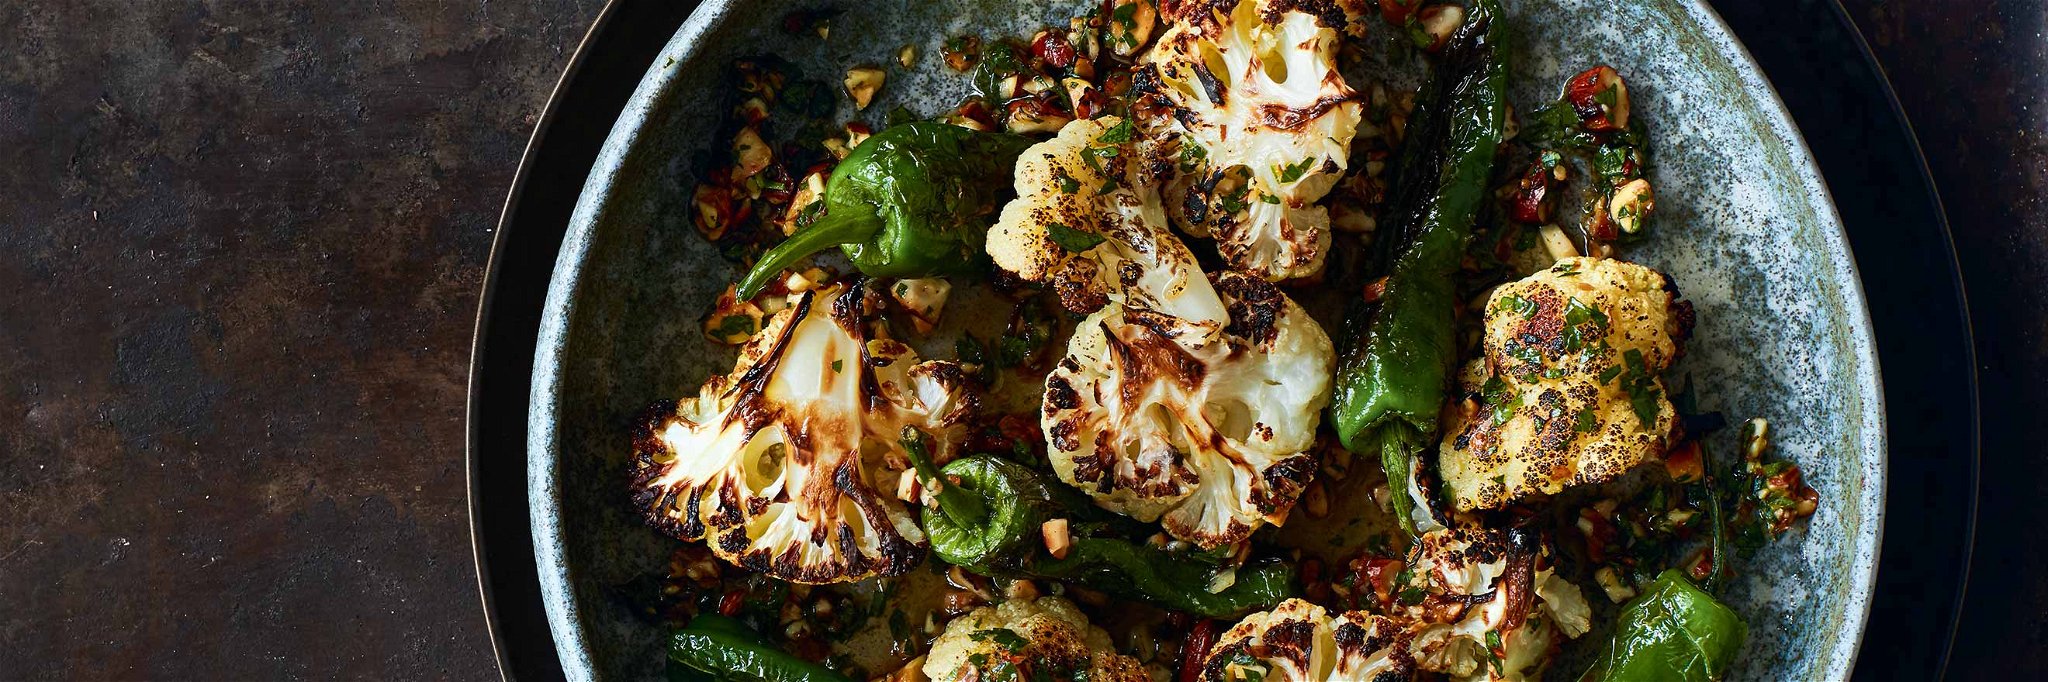 Grilled Cauliflower with Padron Peppers and Salsa Picada